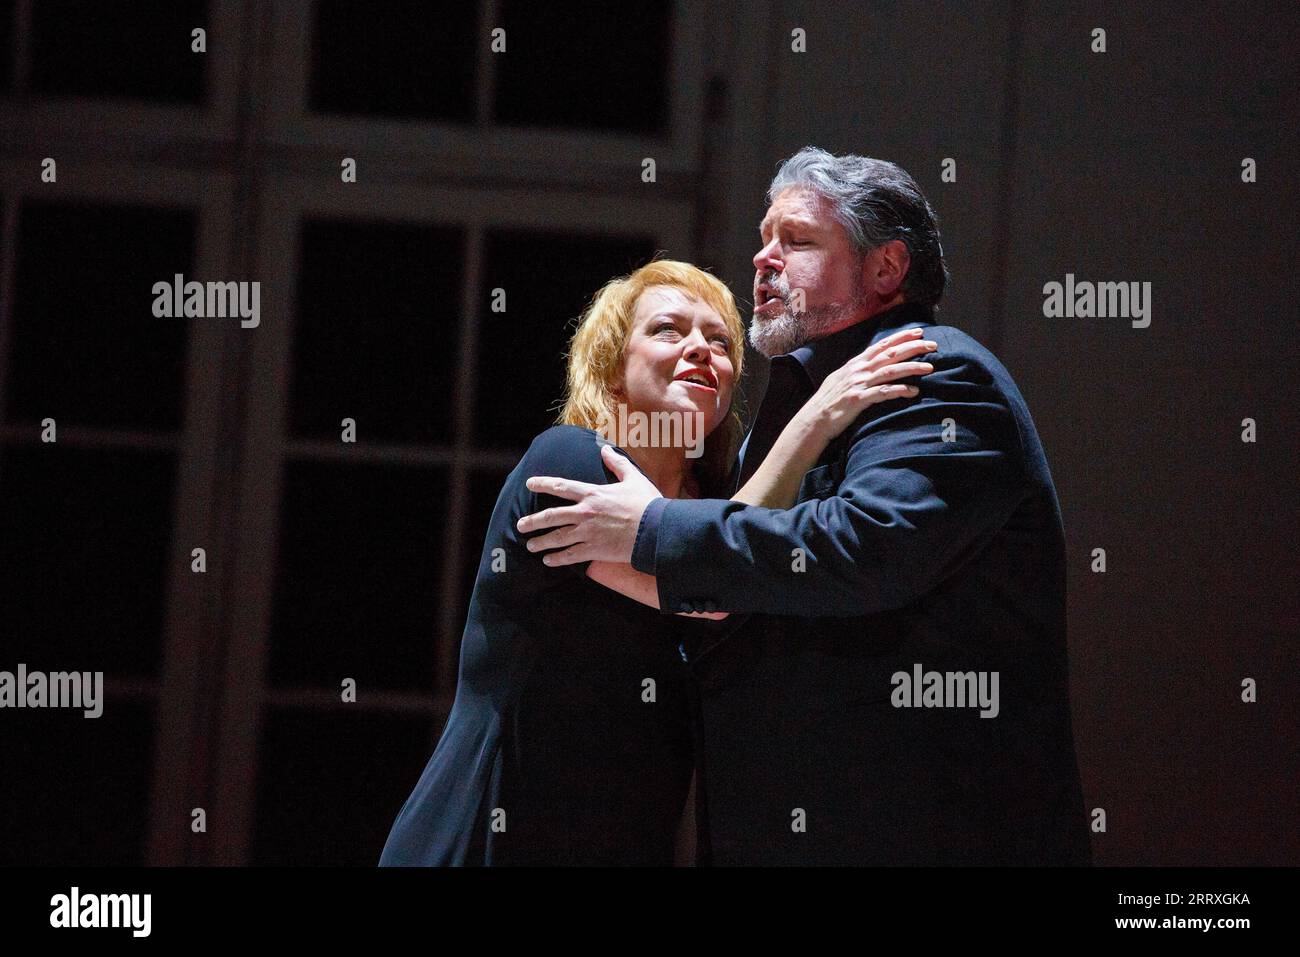 Nina Stemme (Isolde), Stephen Gould (Tristan) in TRISTAN UND ISOLDE by Wagner at The Royal Opera, Covent Garden, London WC2  05/12/2014     conductor: Antonio Pappano  design: Johannes Leiacker  lighting: Olaf Winter  director: Christof Loy Stock Photo